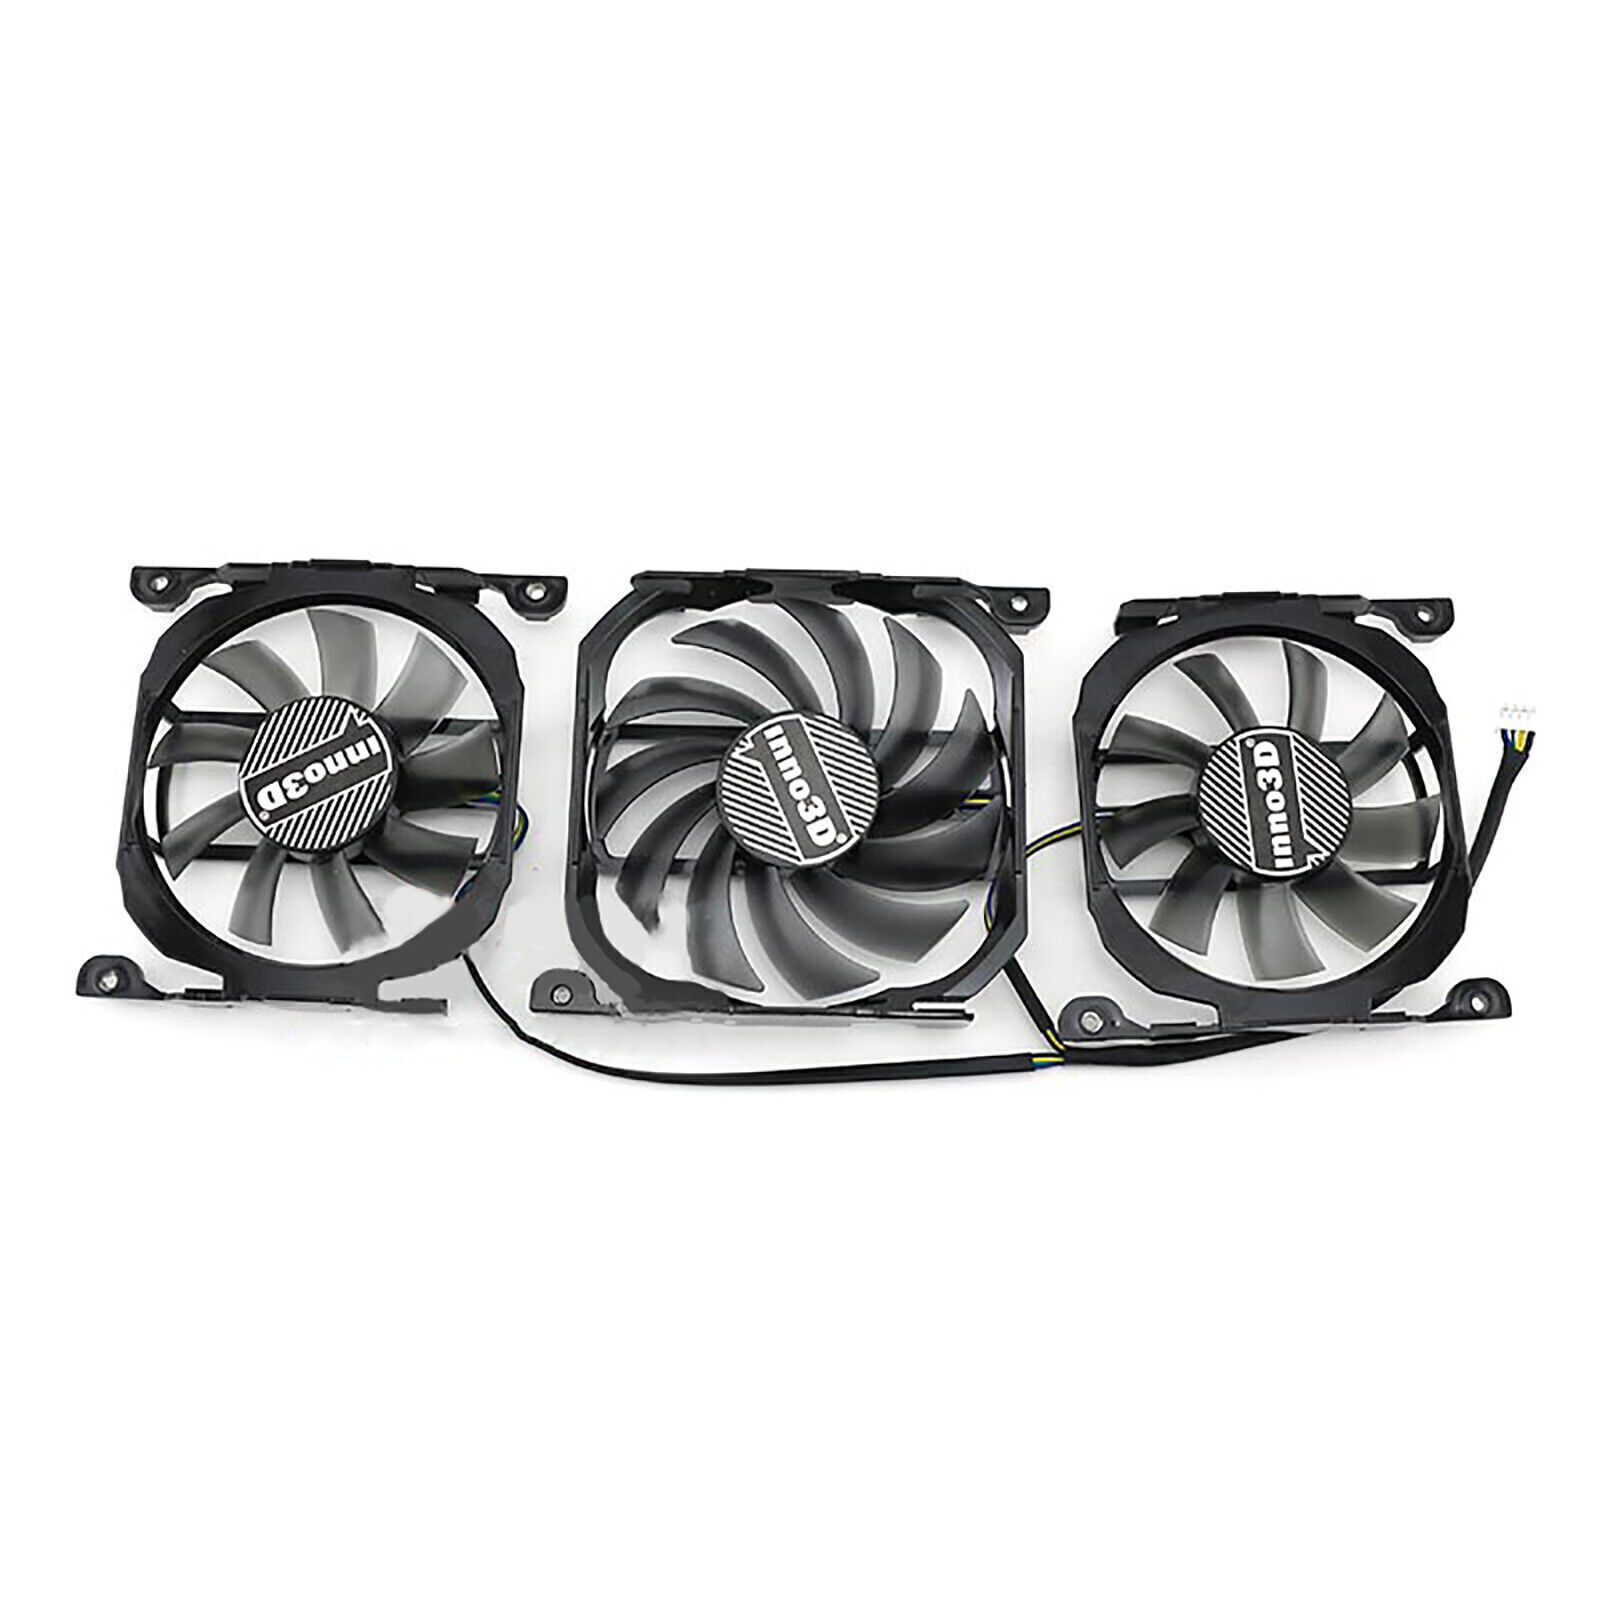 Graphics Card Cooling Fan for Yeston R9 290 R9 280X Game Master Video Card